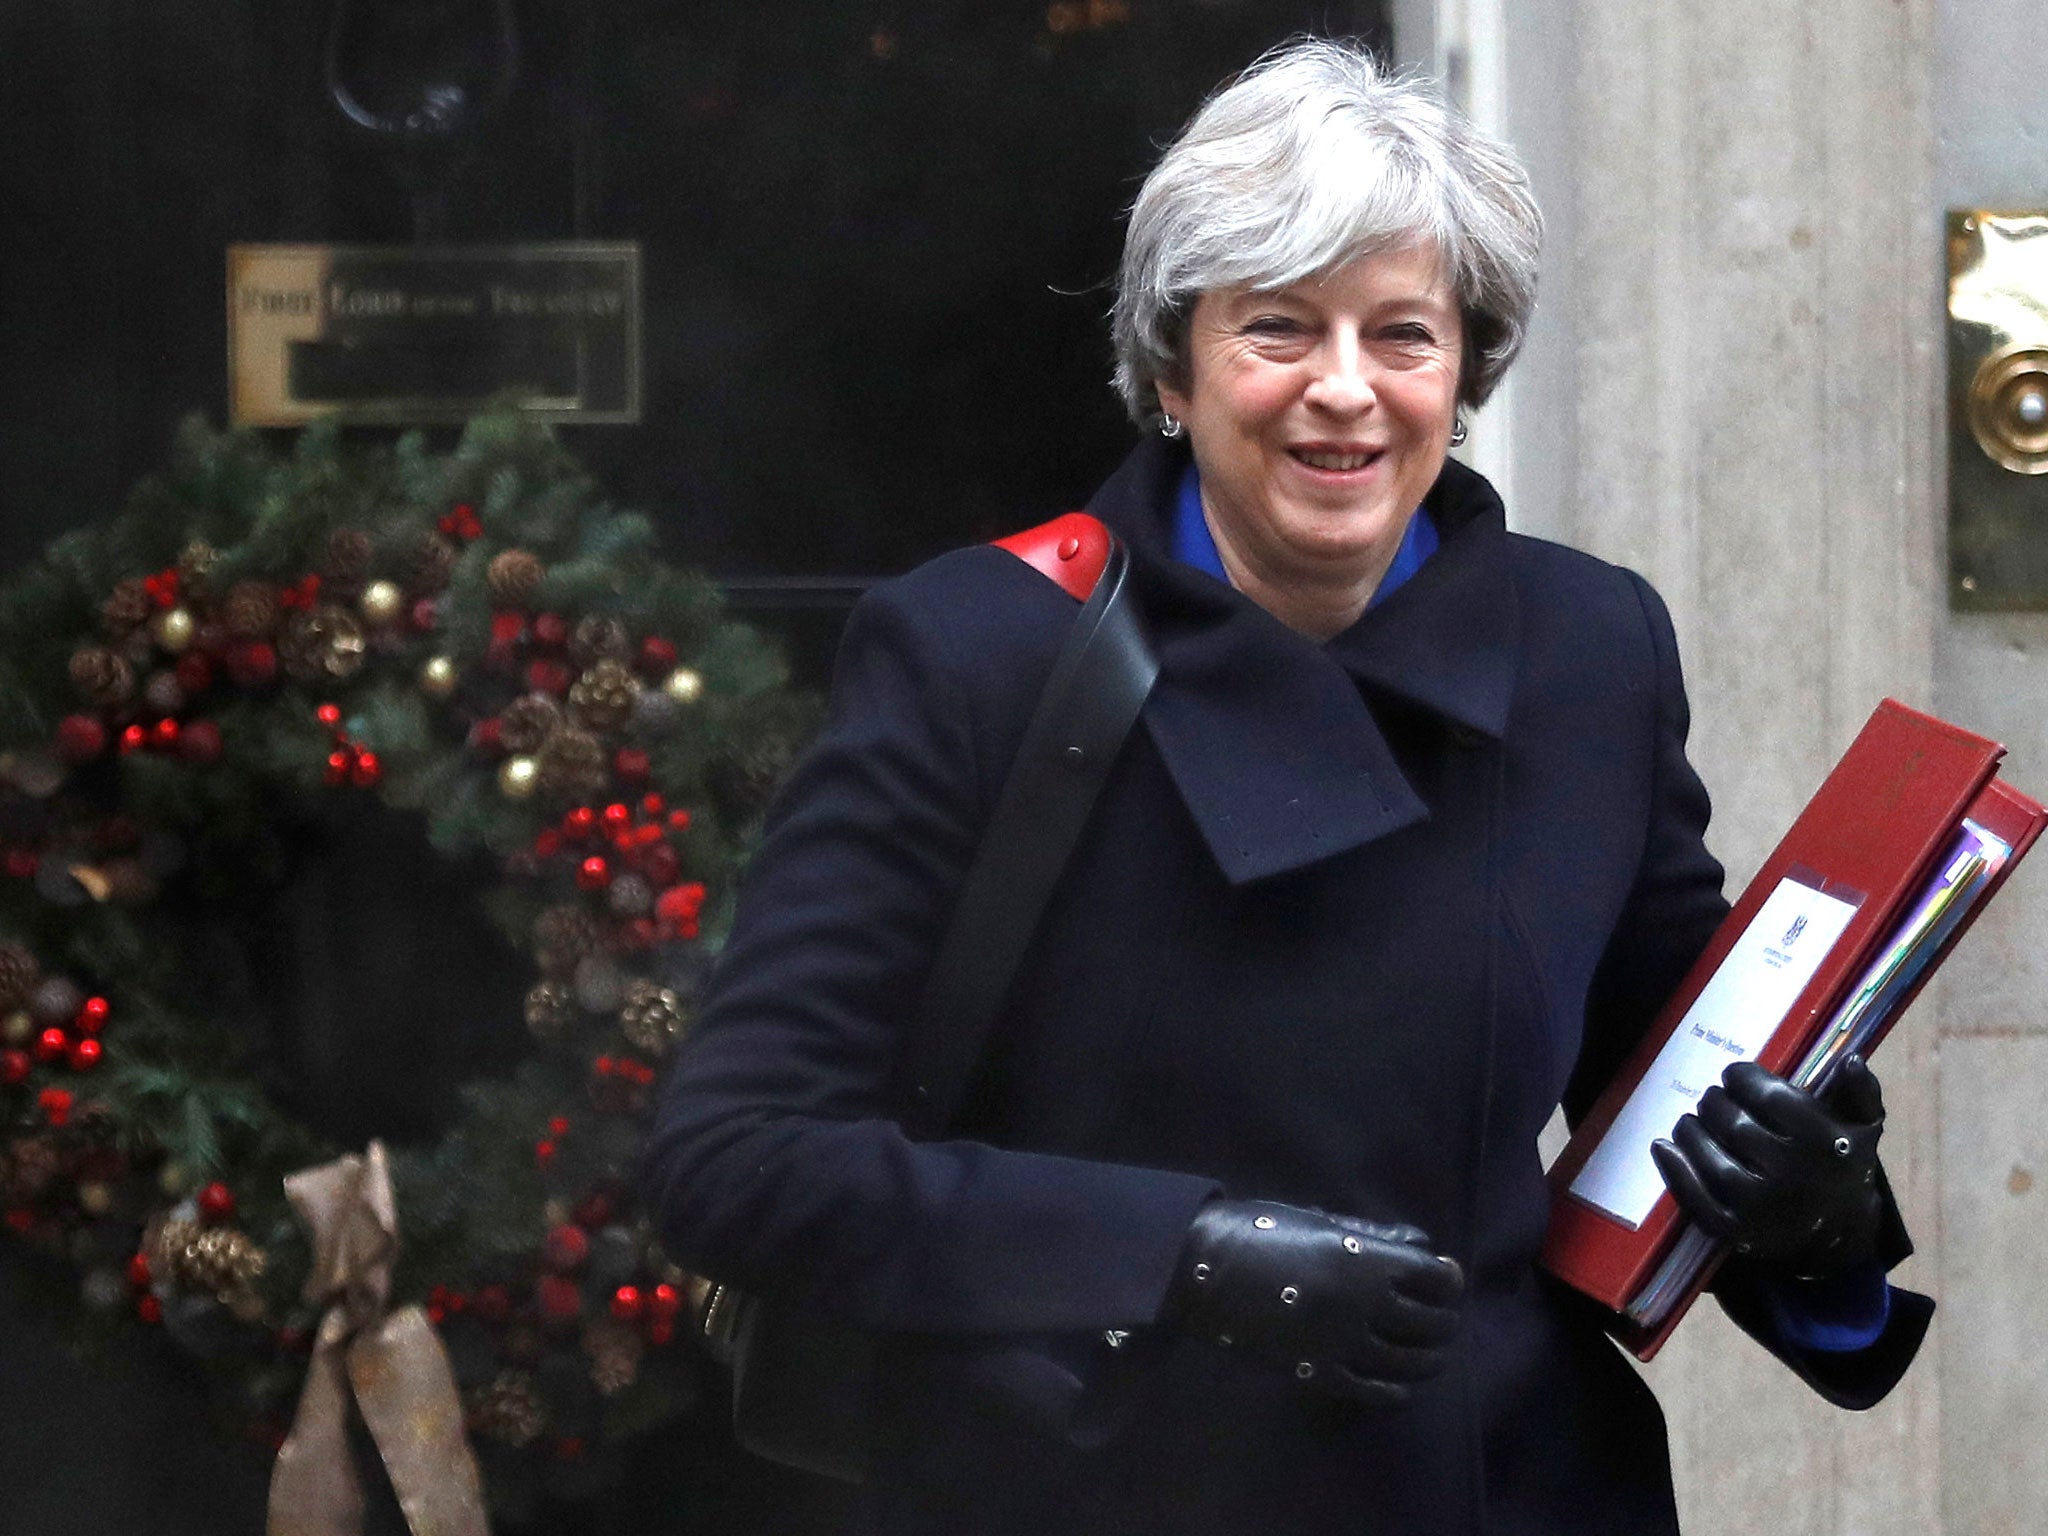 Their long friendship did not stop May from asking Green to resign from her Cabinet after an inquiry found he had breached the ministerial code